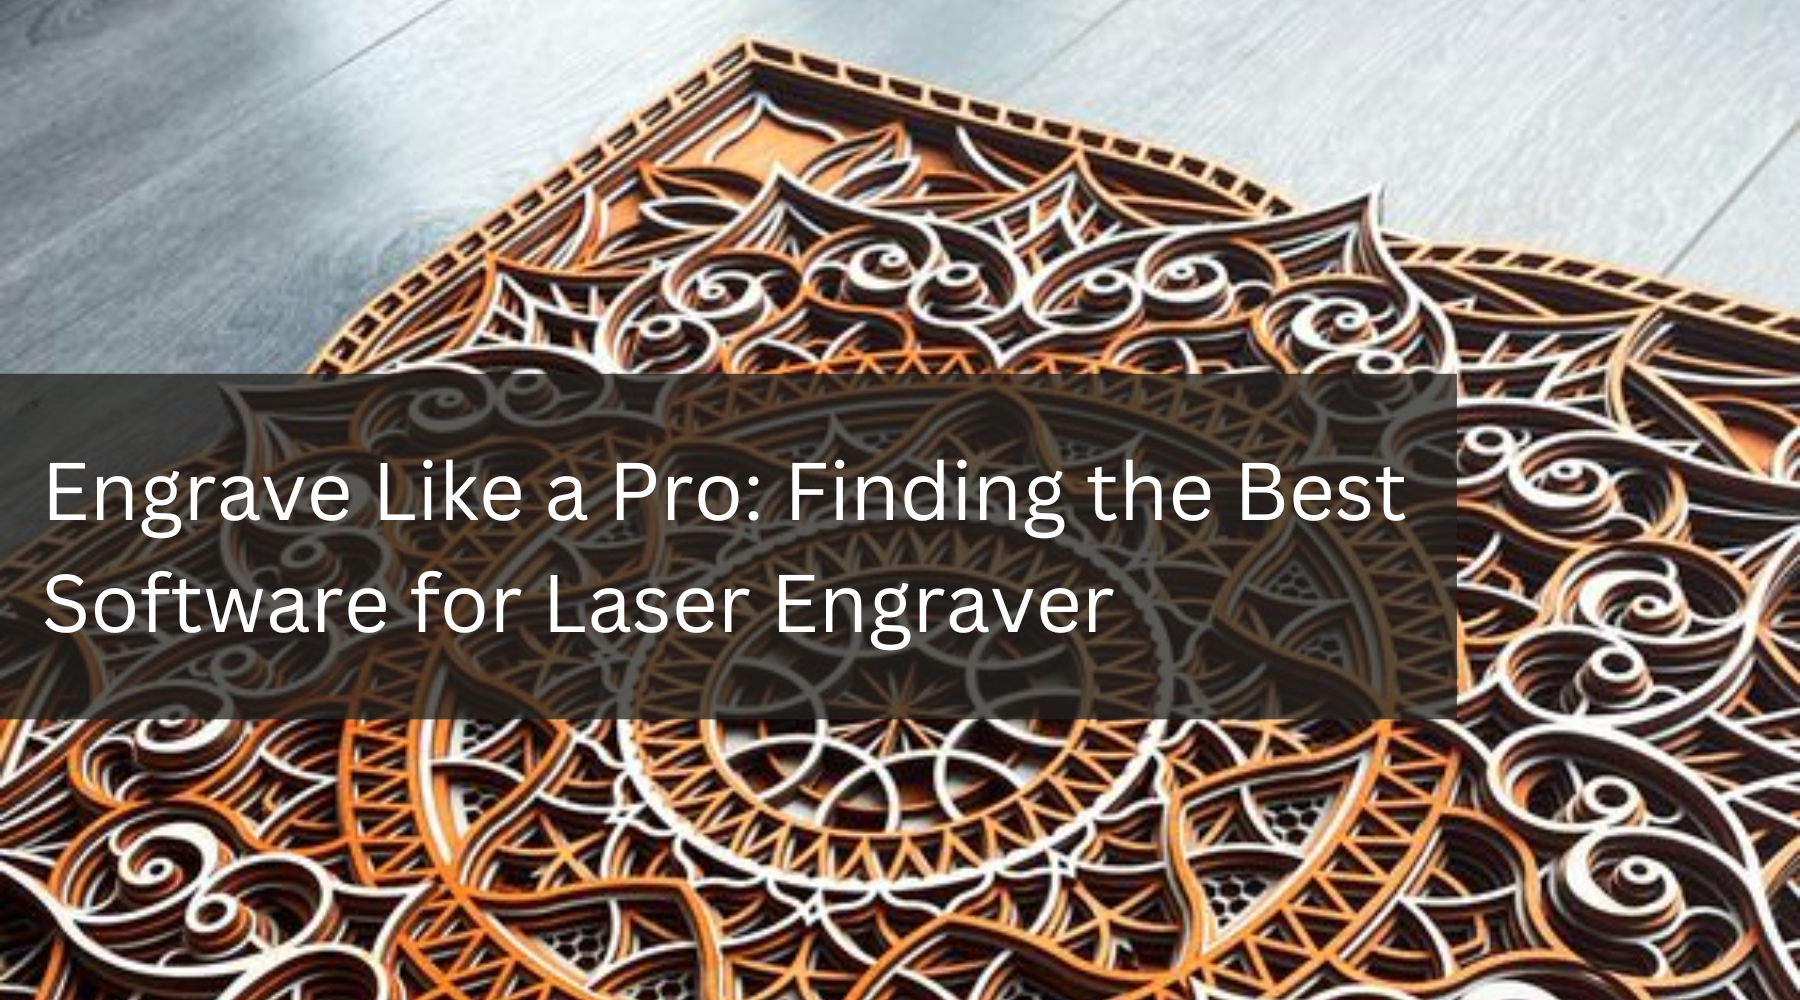 Engrave Like a Pro: Finding the Best Software for Laser Engraver